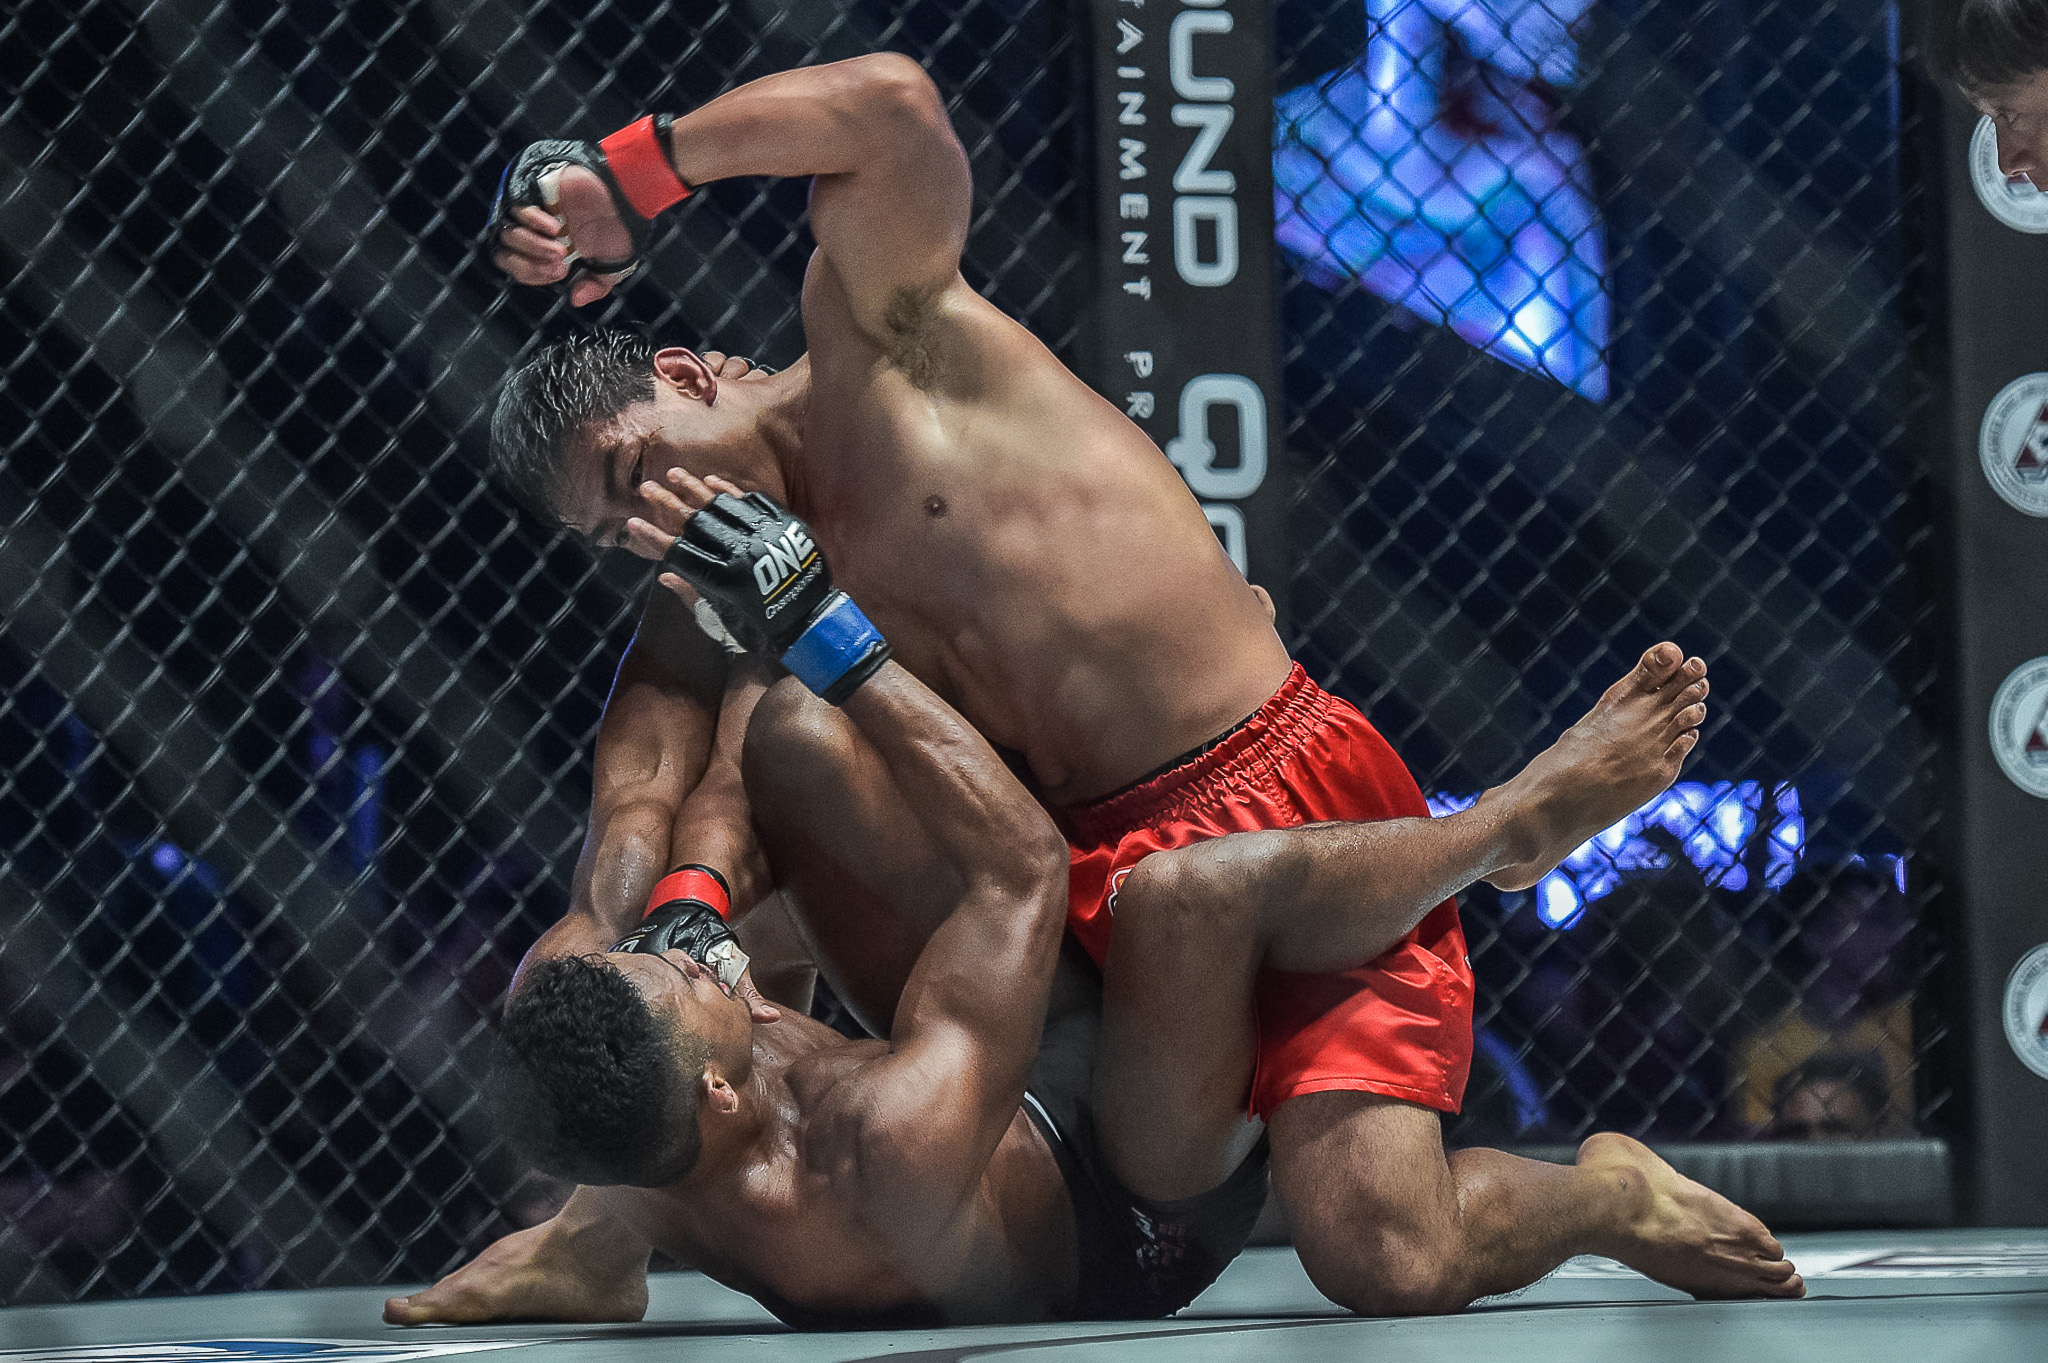 Folayang dominates Khan to become new lightweight champ